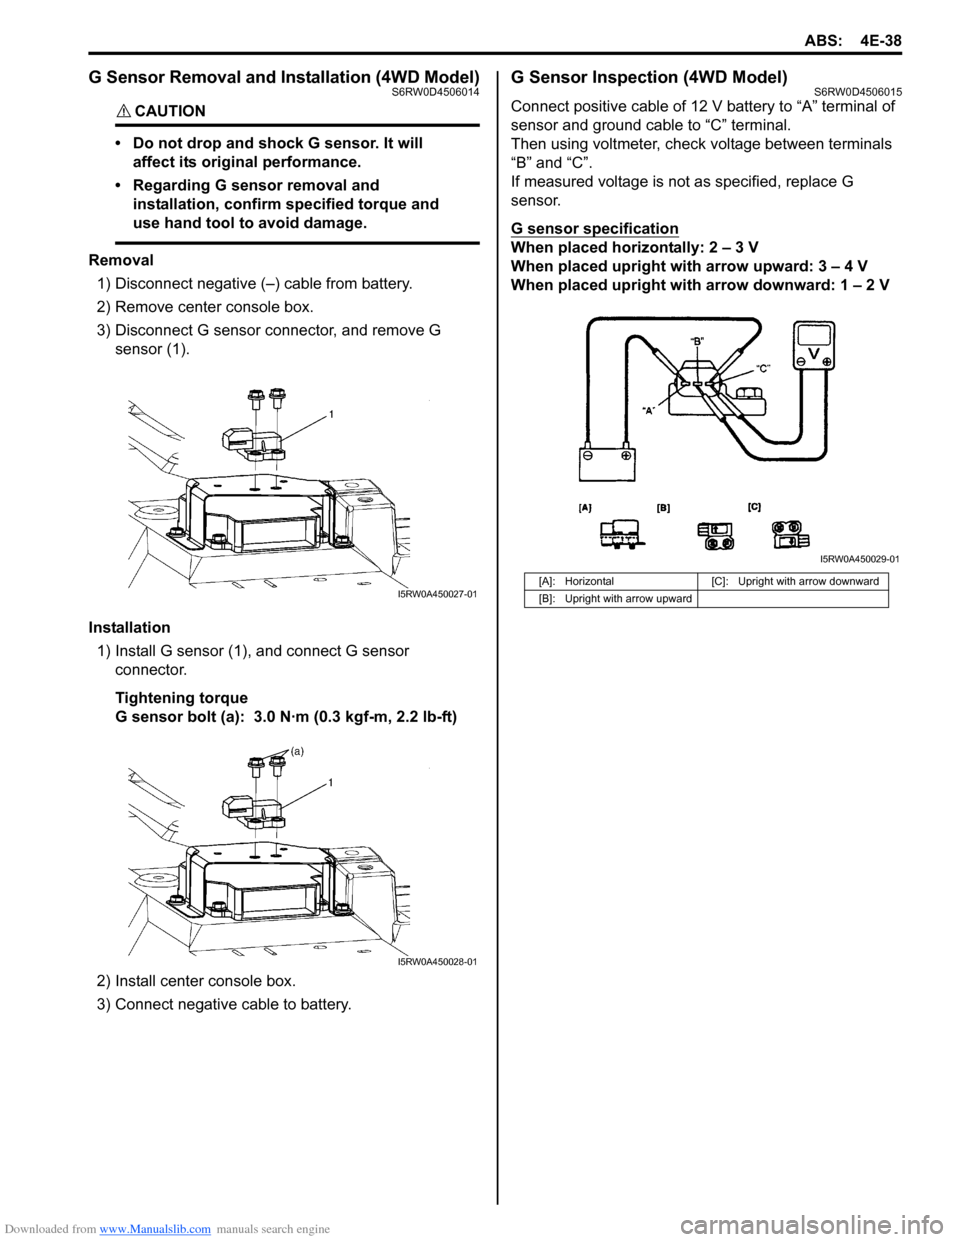 SUZUKI SX4 2006 1.G Service Workshop Manual Downloaded from www.Manualslib.com manuals search engine ABS: 4E-38
G Sensor Removal and Installation (4WD Model)S6RW0D4506014
CAUTION! 
• Do not drop and shock G sensor. It will 
affect its origina